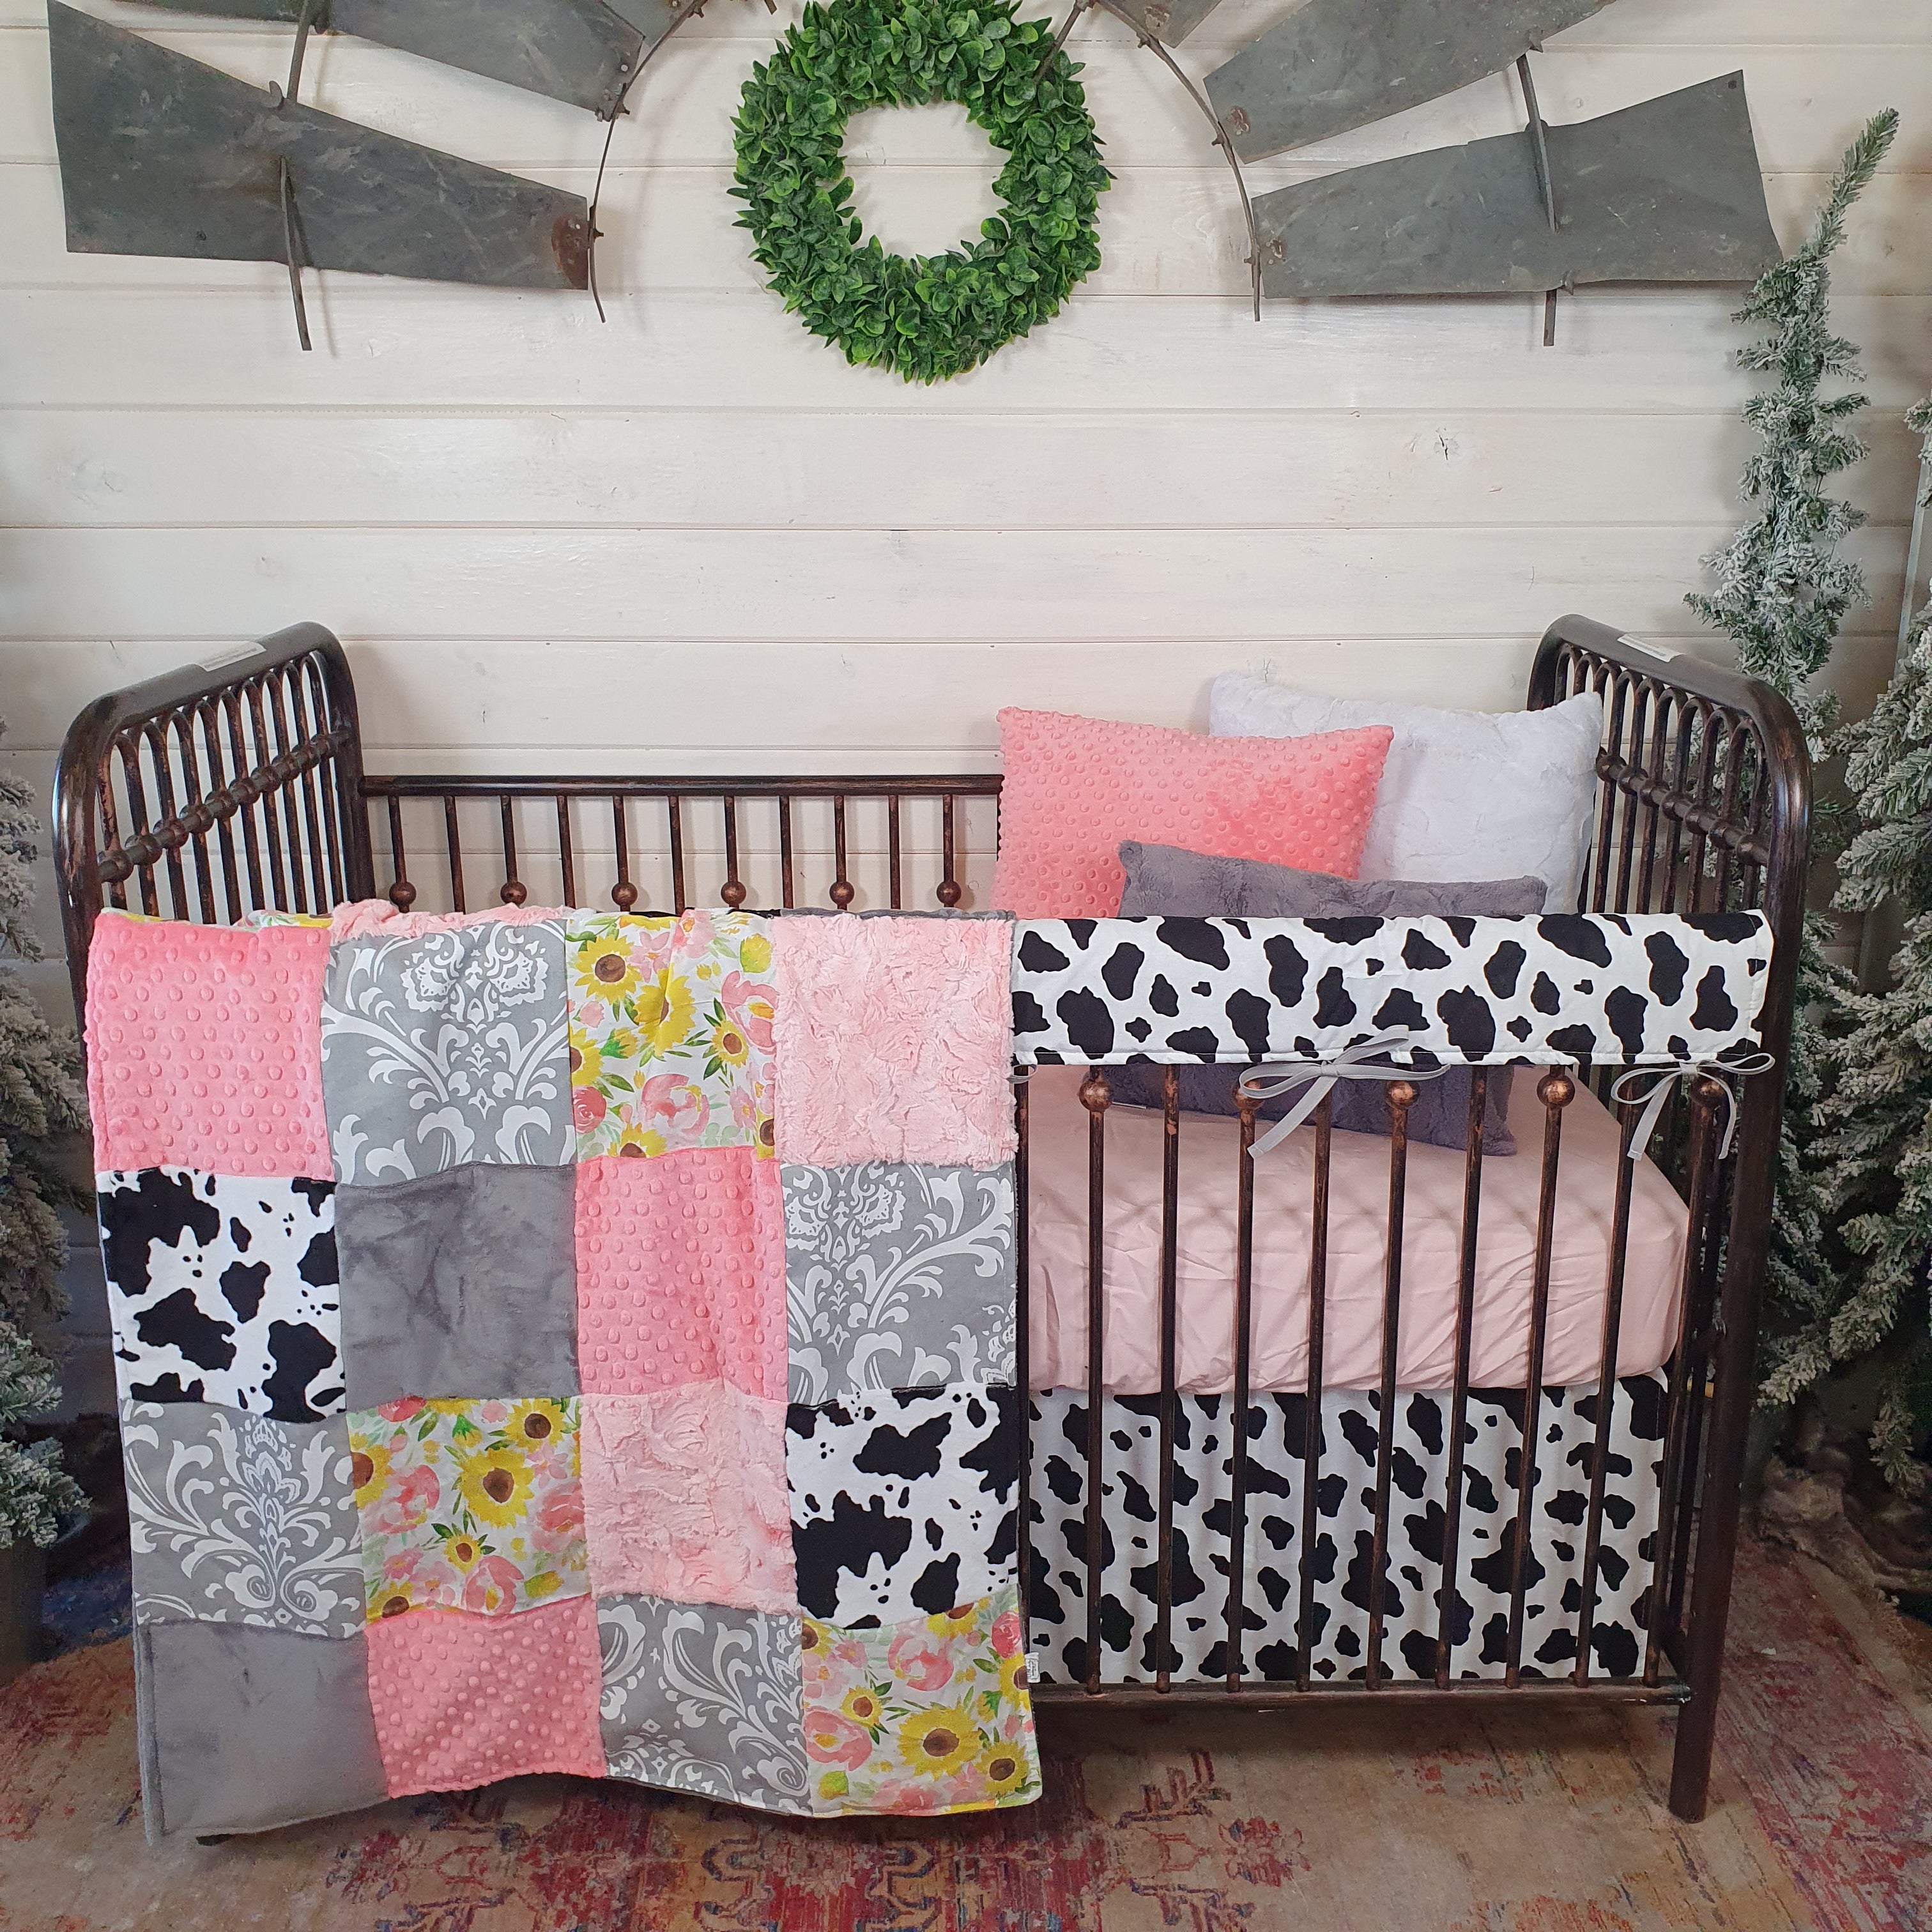 Girl Crib Bedding - Sunflower Rose and Black White Cow Minky Farm Baby Bedding Collection